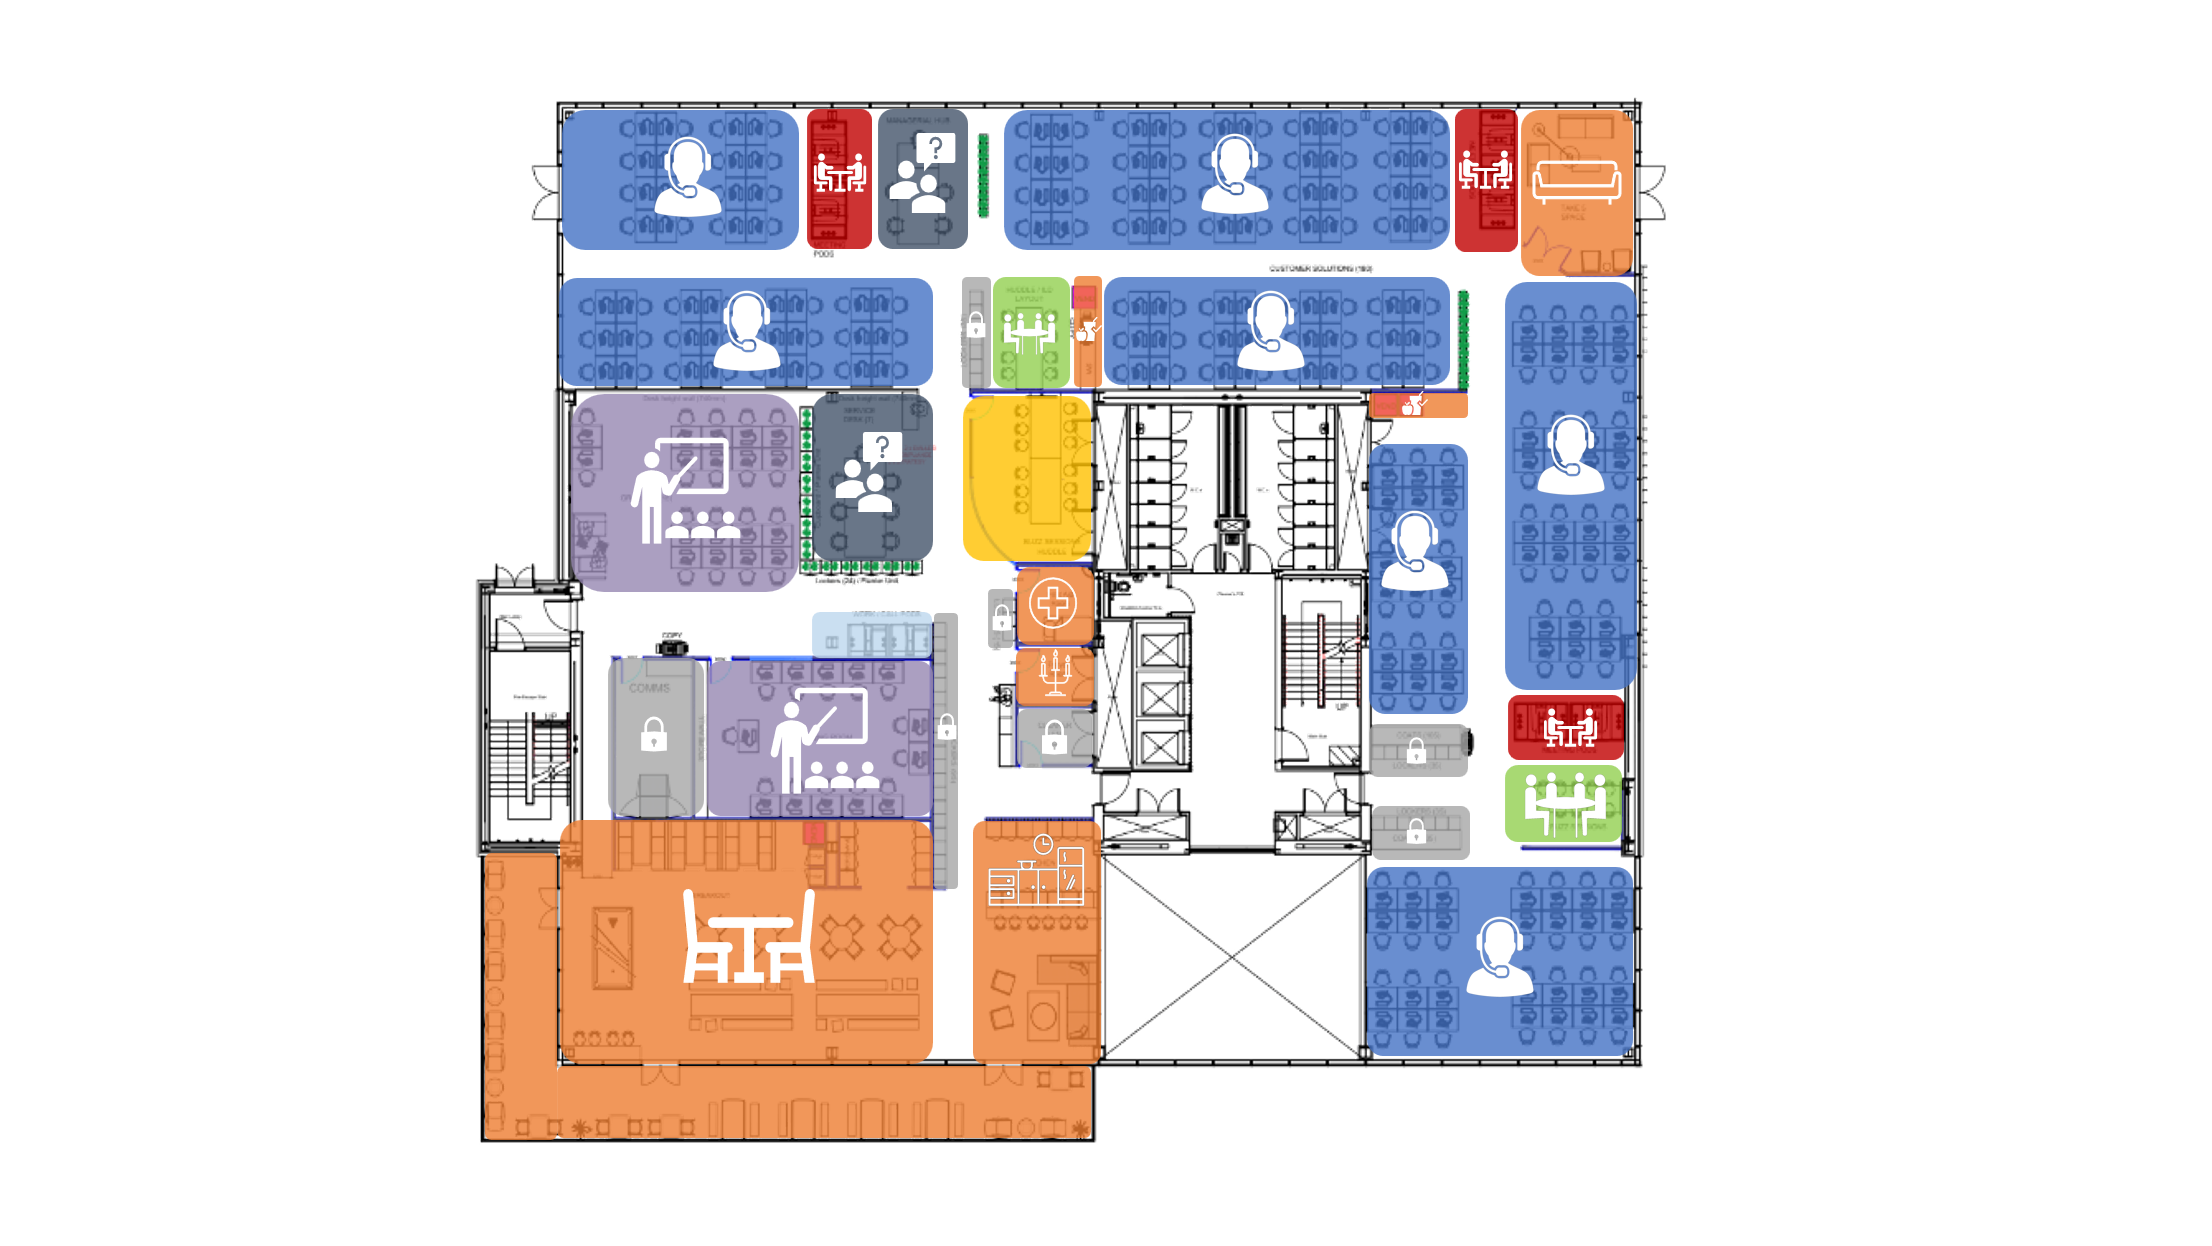 An example space plan with zoning details overlaid, based on an activity-based working model